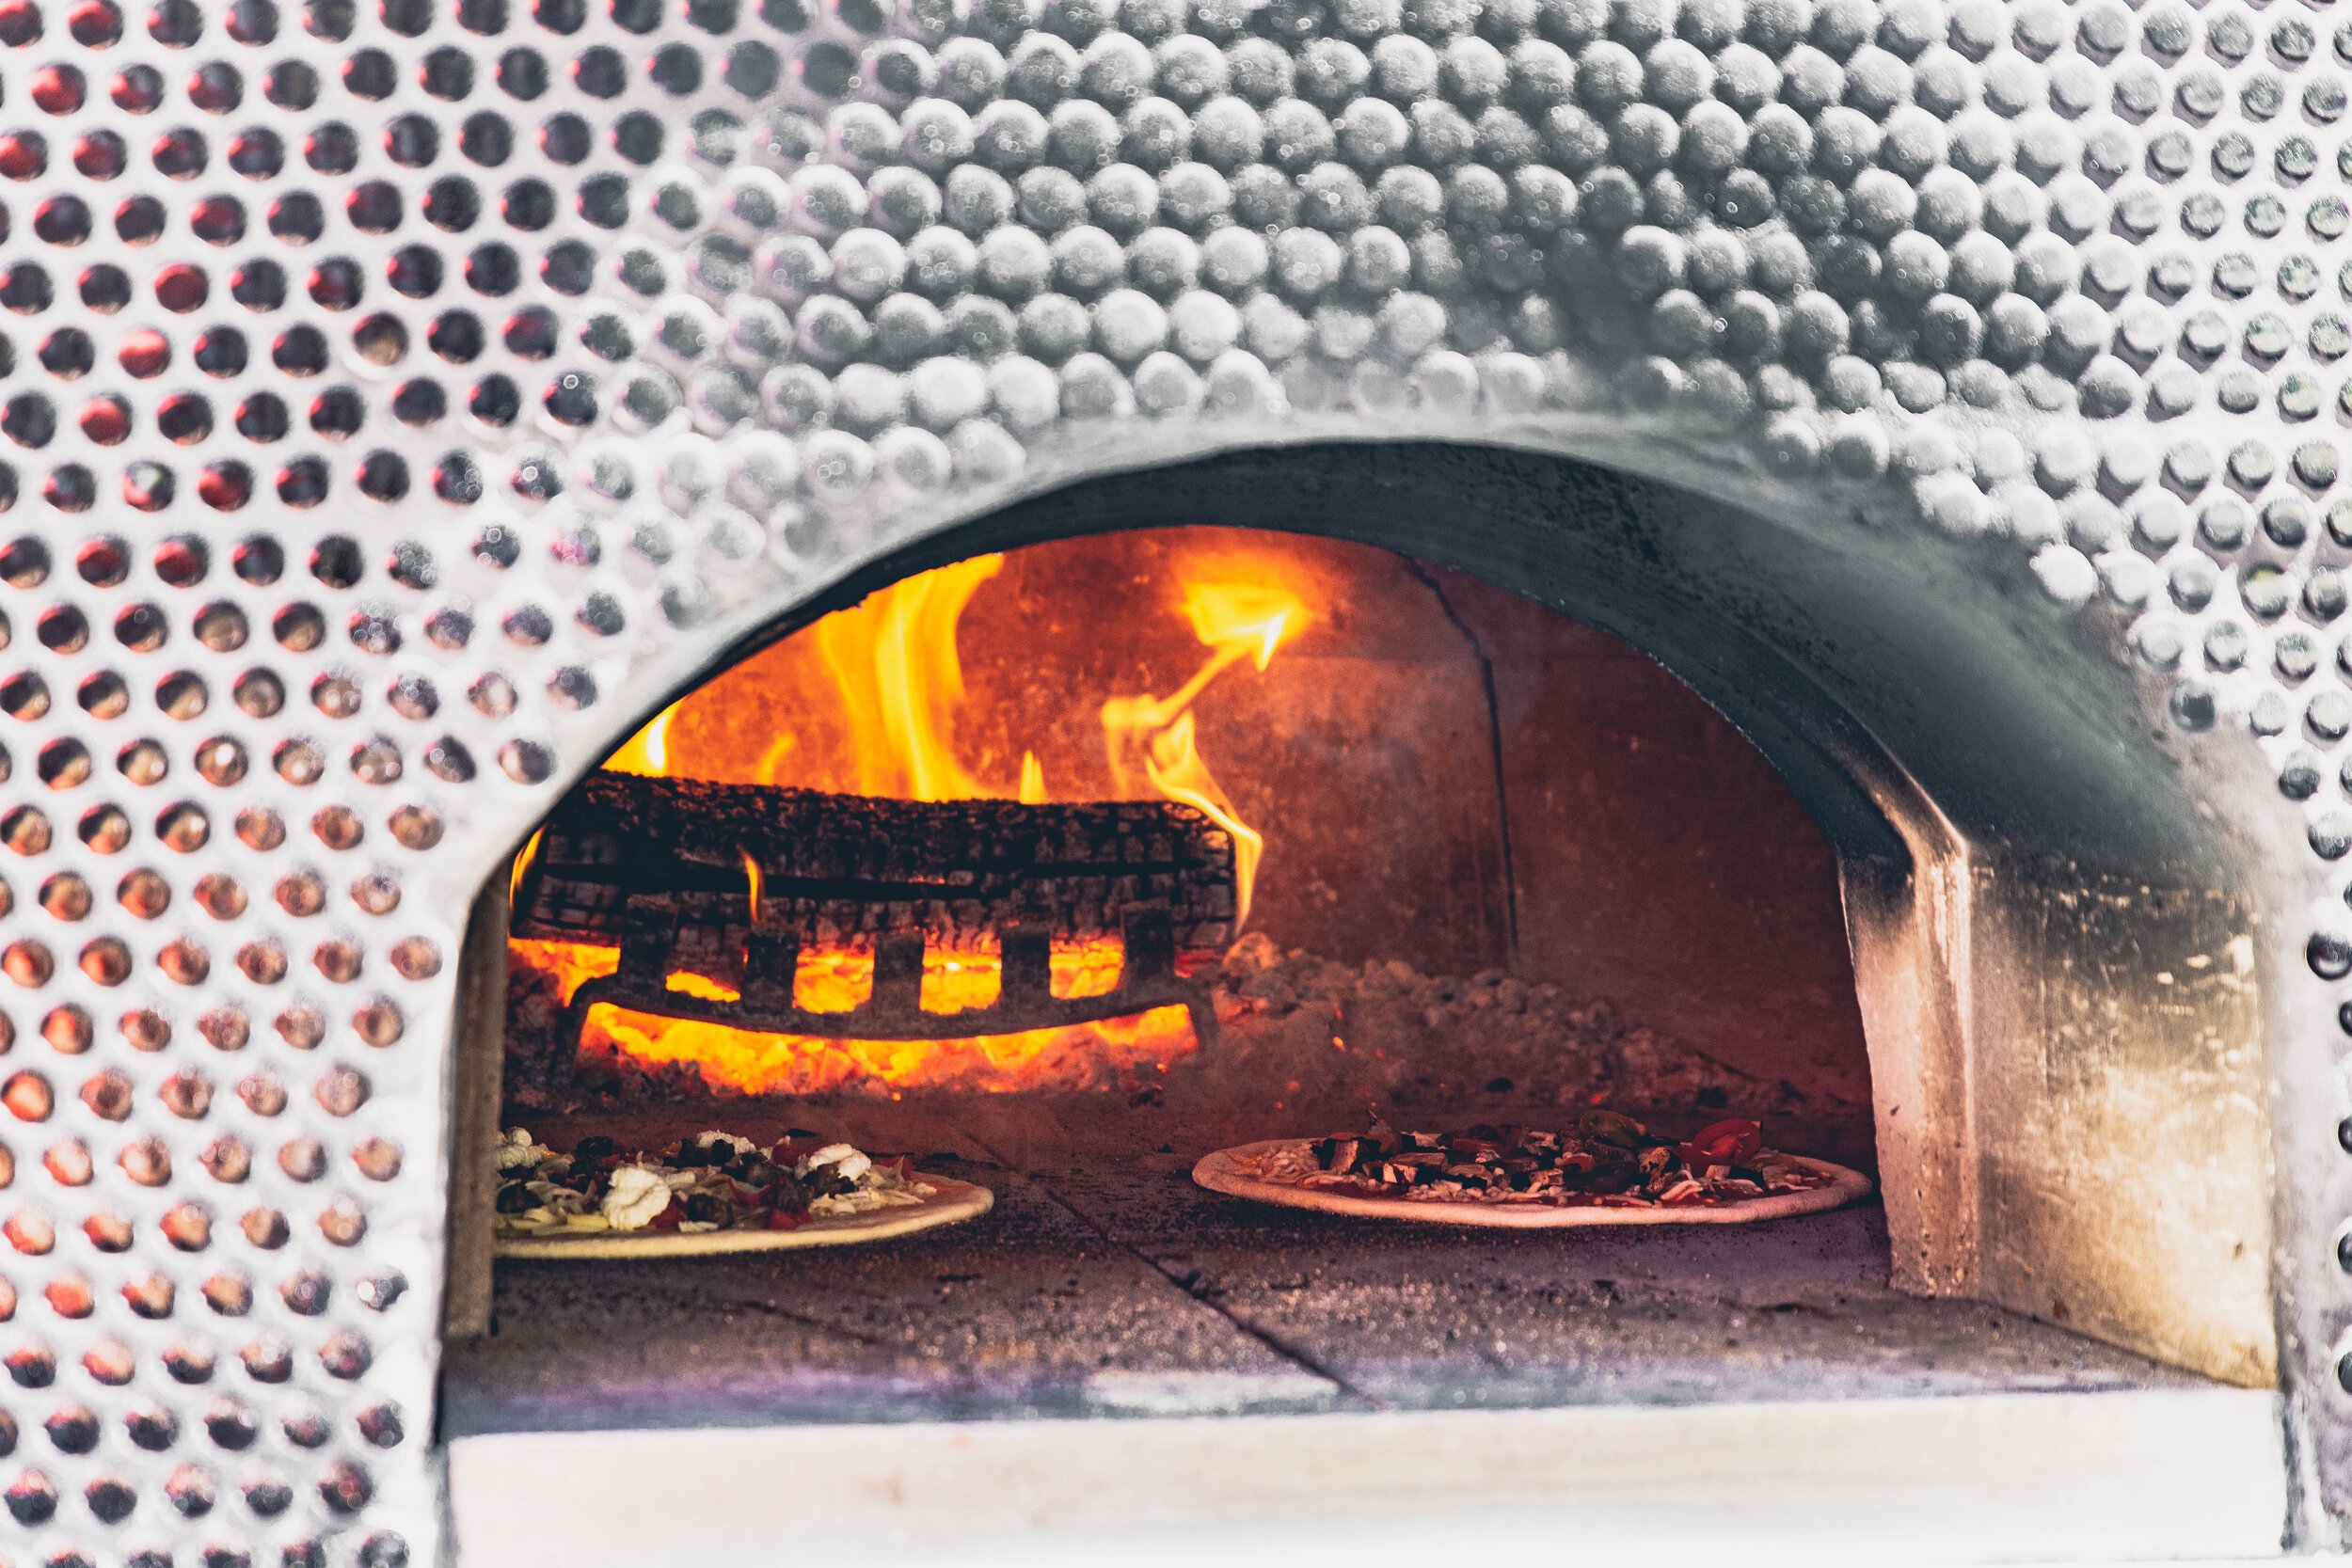 www.santabarbarawedding.com | Firefly Pizza Company | Pizza Baking in the Oven